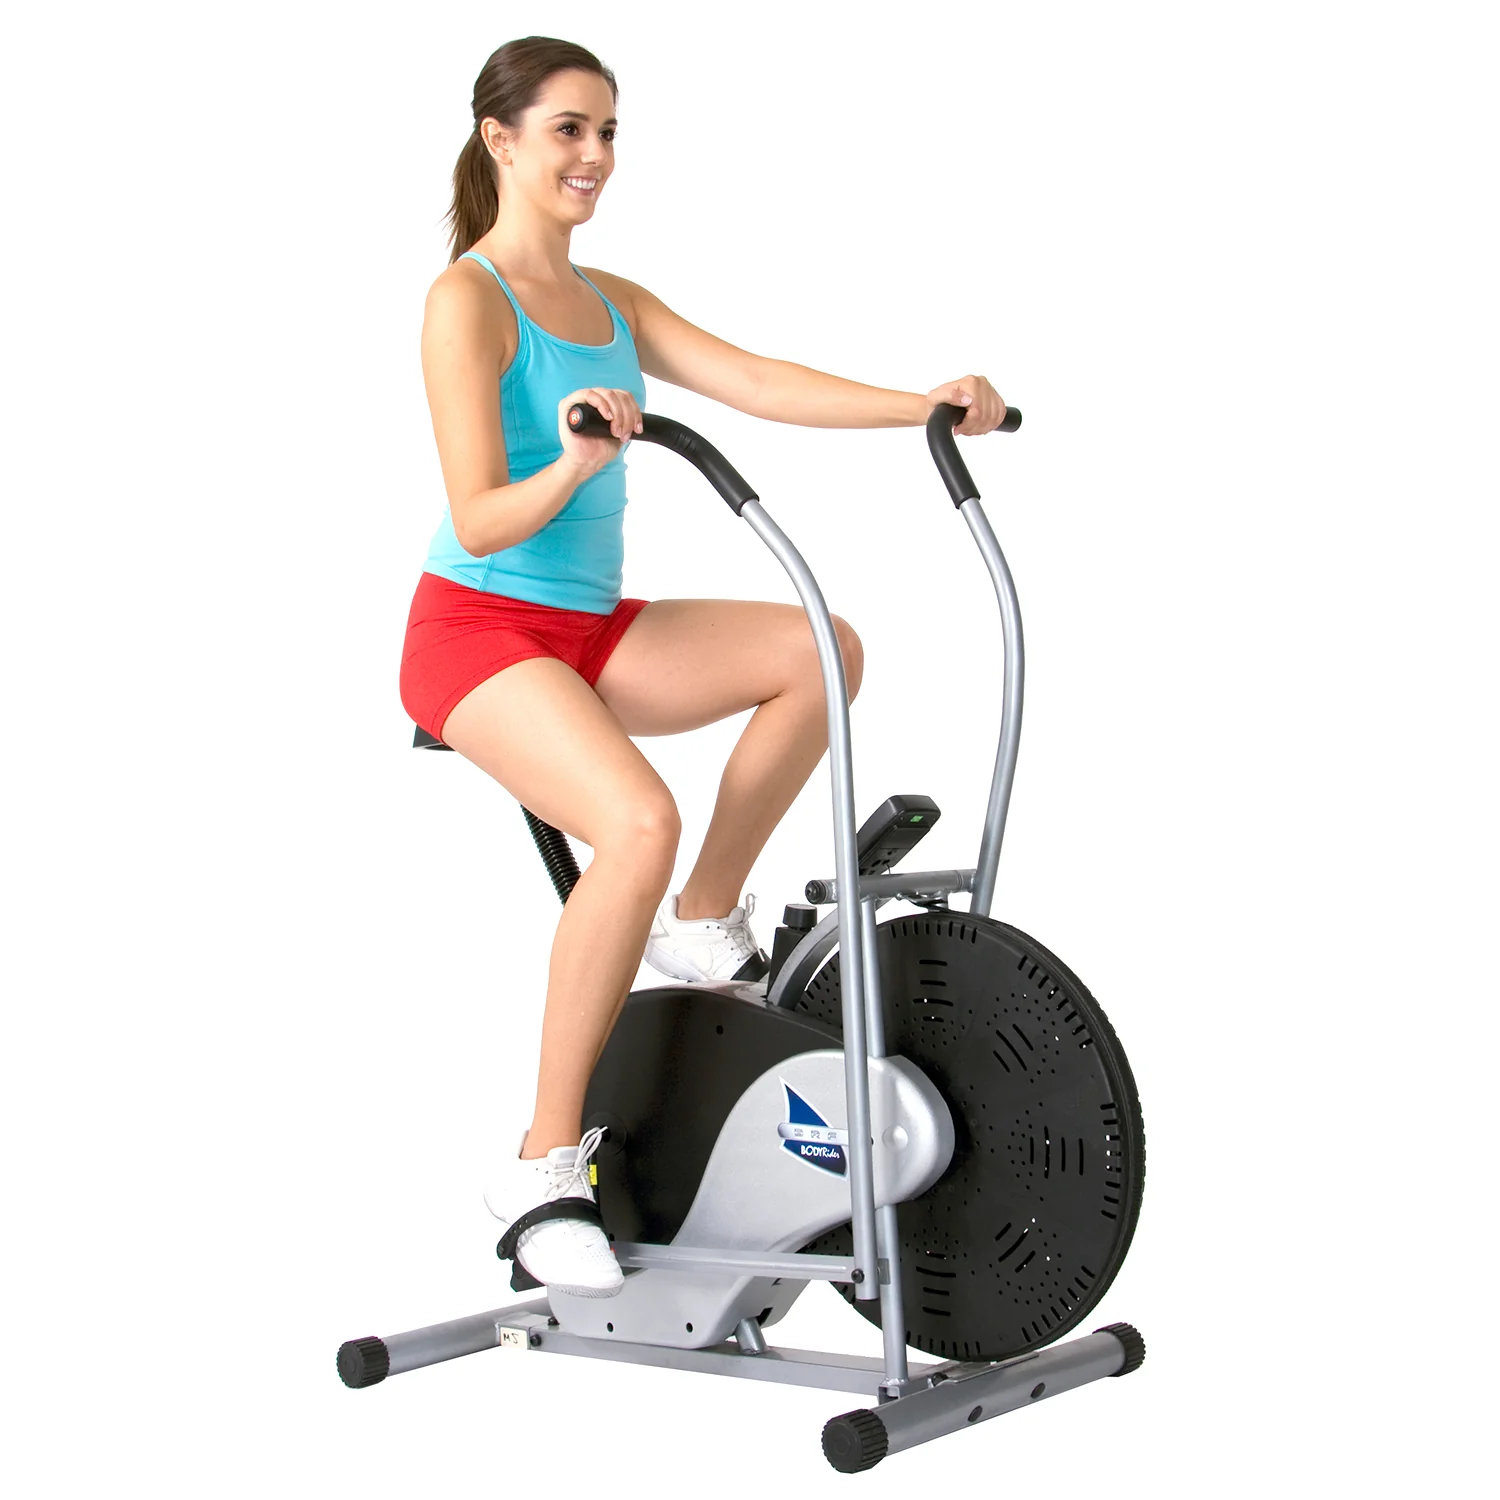 Review of the Body Rider Exercise Bike